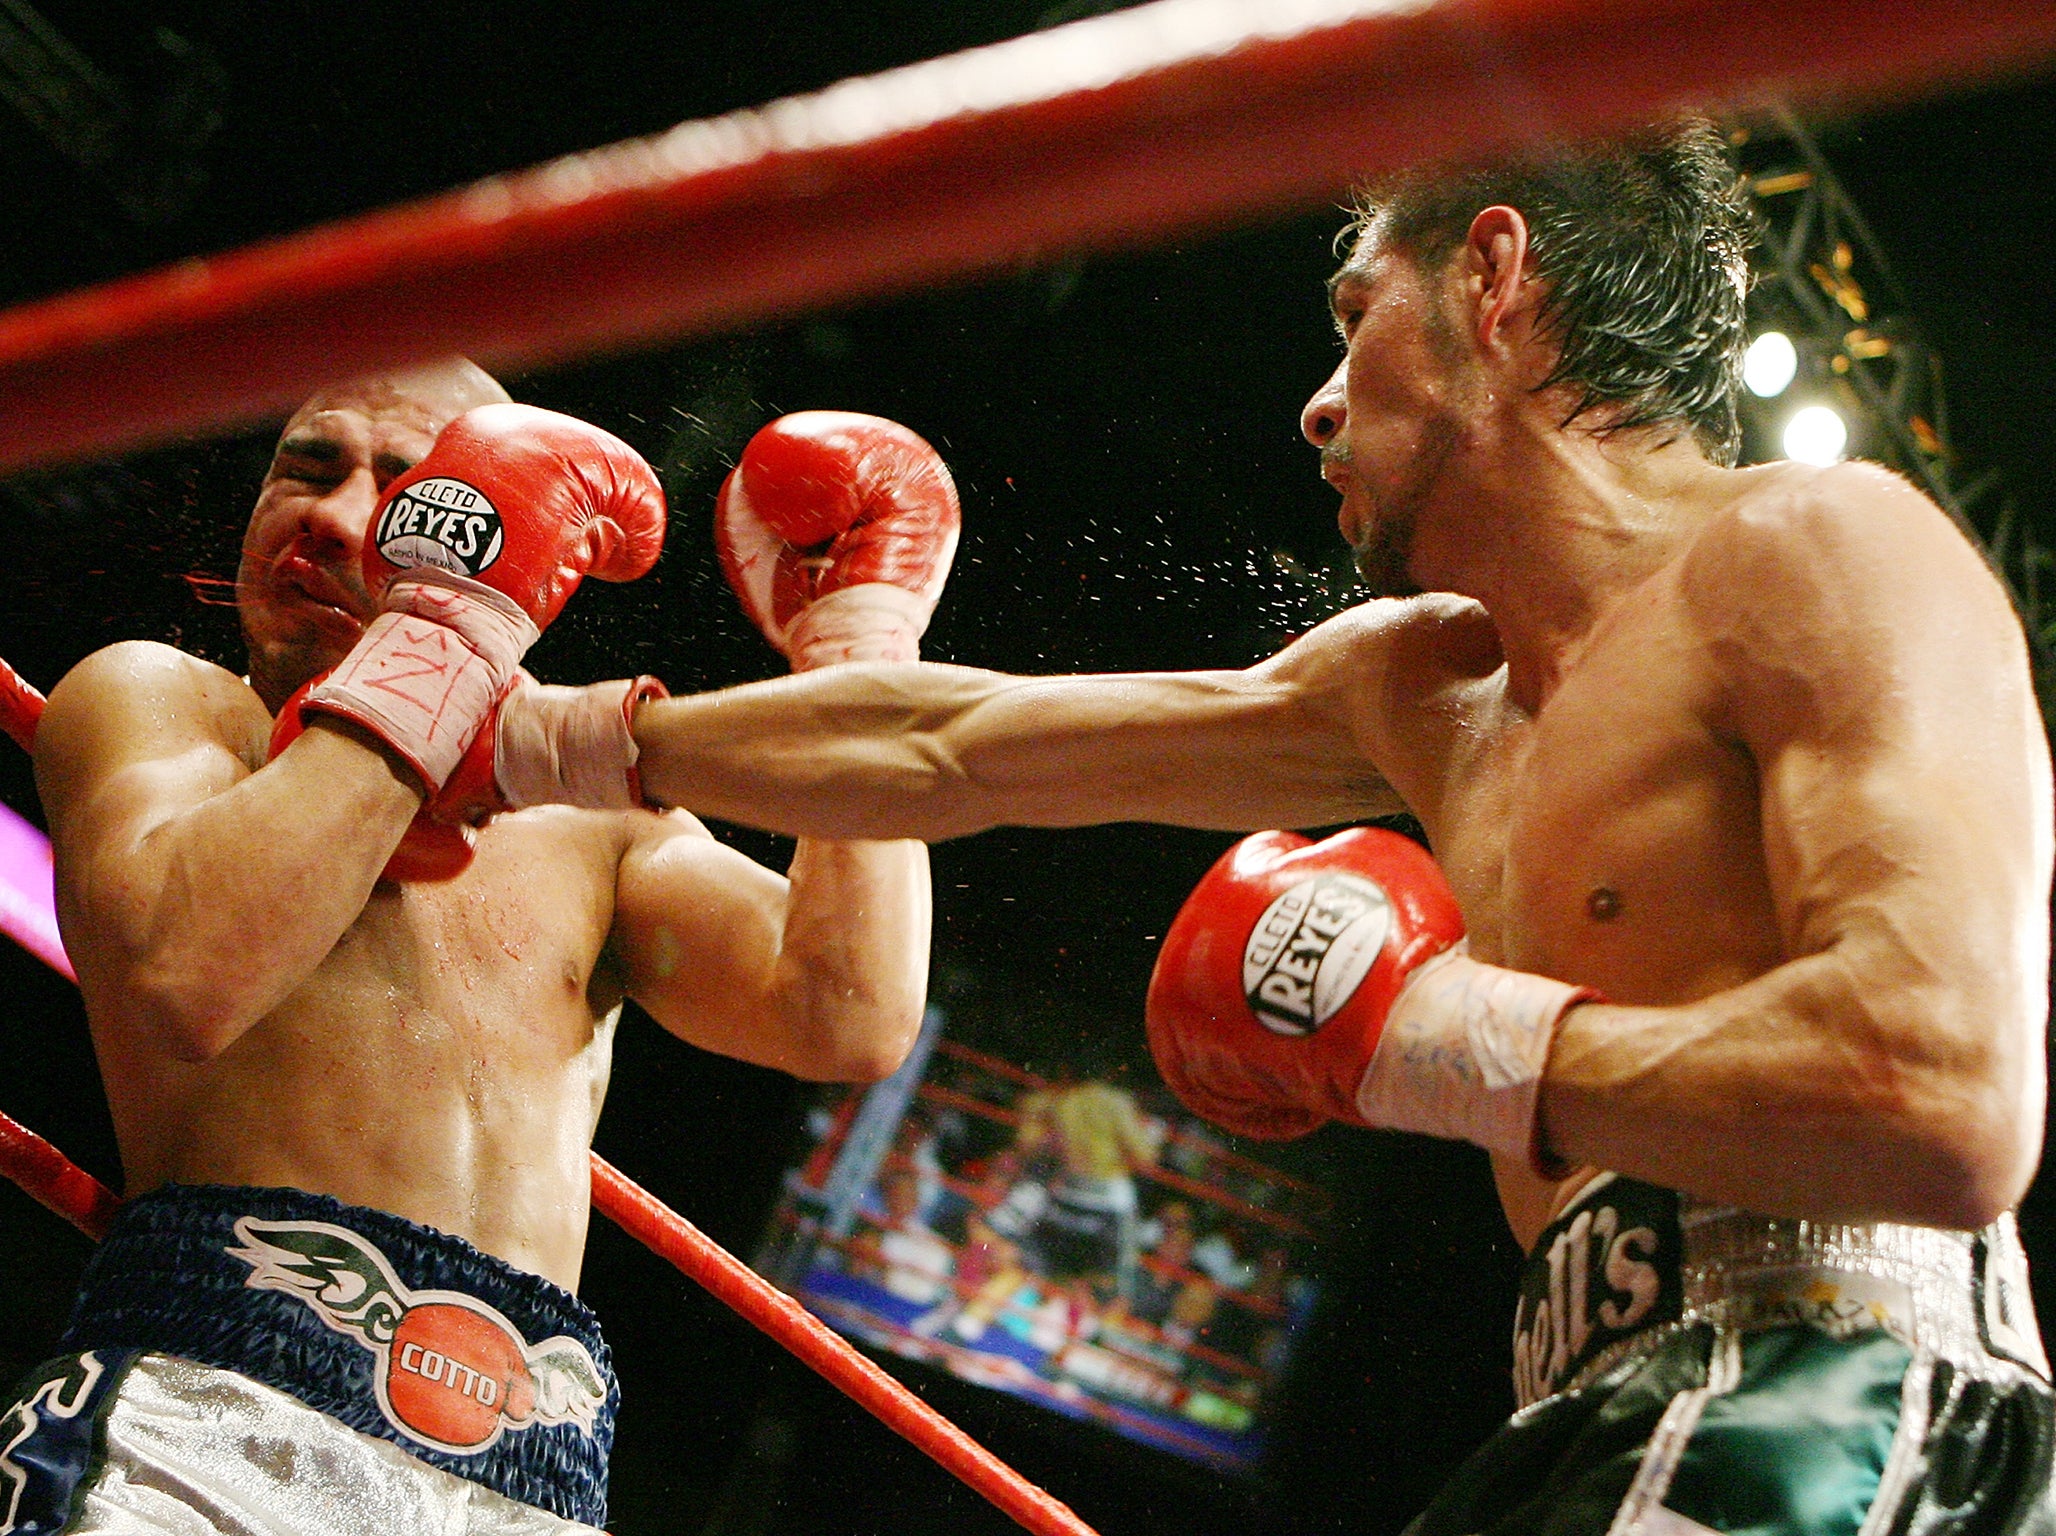 Cotto was left bloodied and beaten by Margarito's hardened hand wraps, in 2008